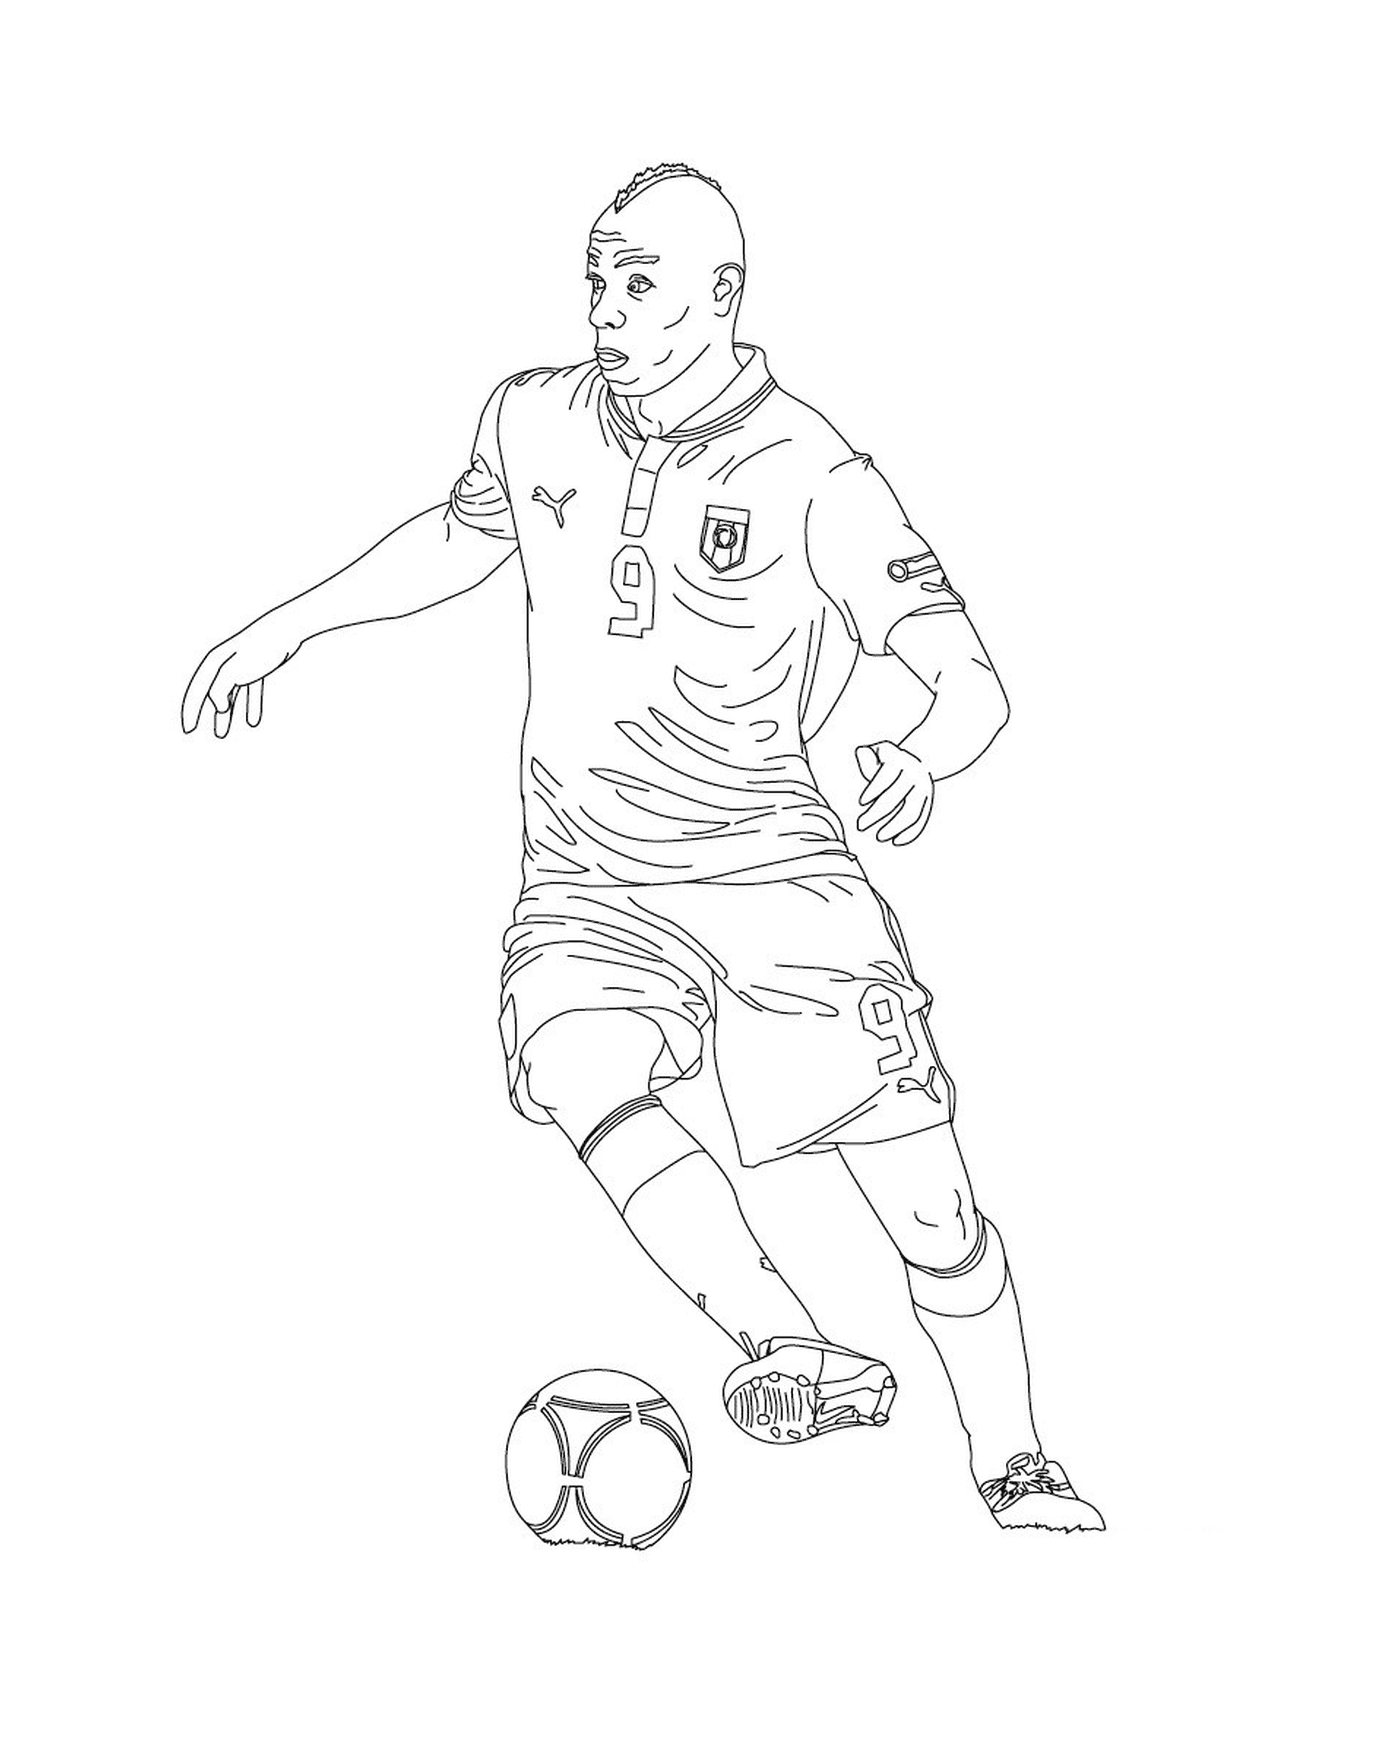  A football player kicking in a ball 